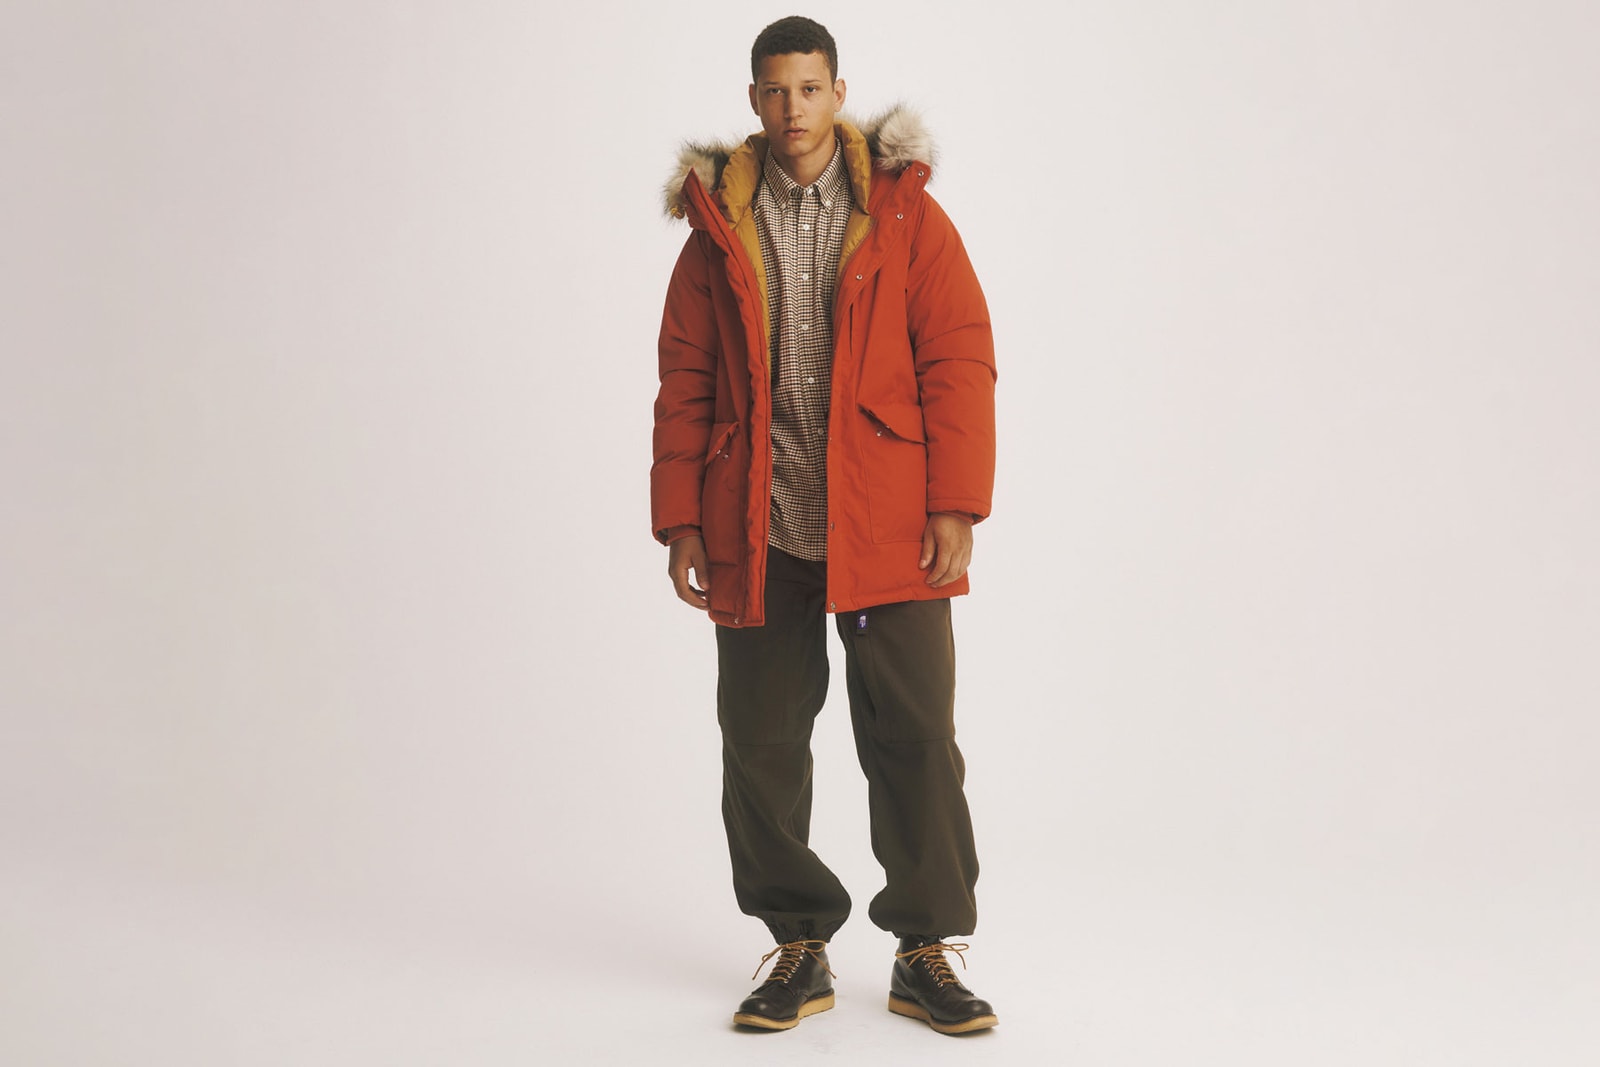 outdoors style outdoorsy lou dalton patagonia the north face hiking gear boots acne balenciaga off white dior hobo reese cooper spencer phipps sustainability karl oskar olsen london new york japan go out white mountaineering